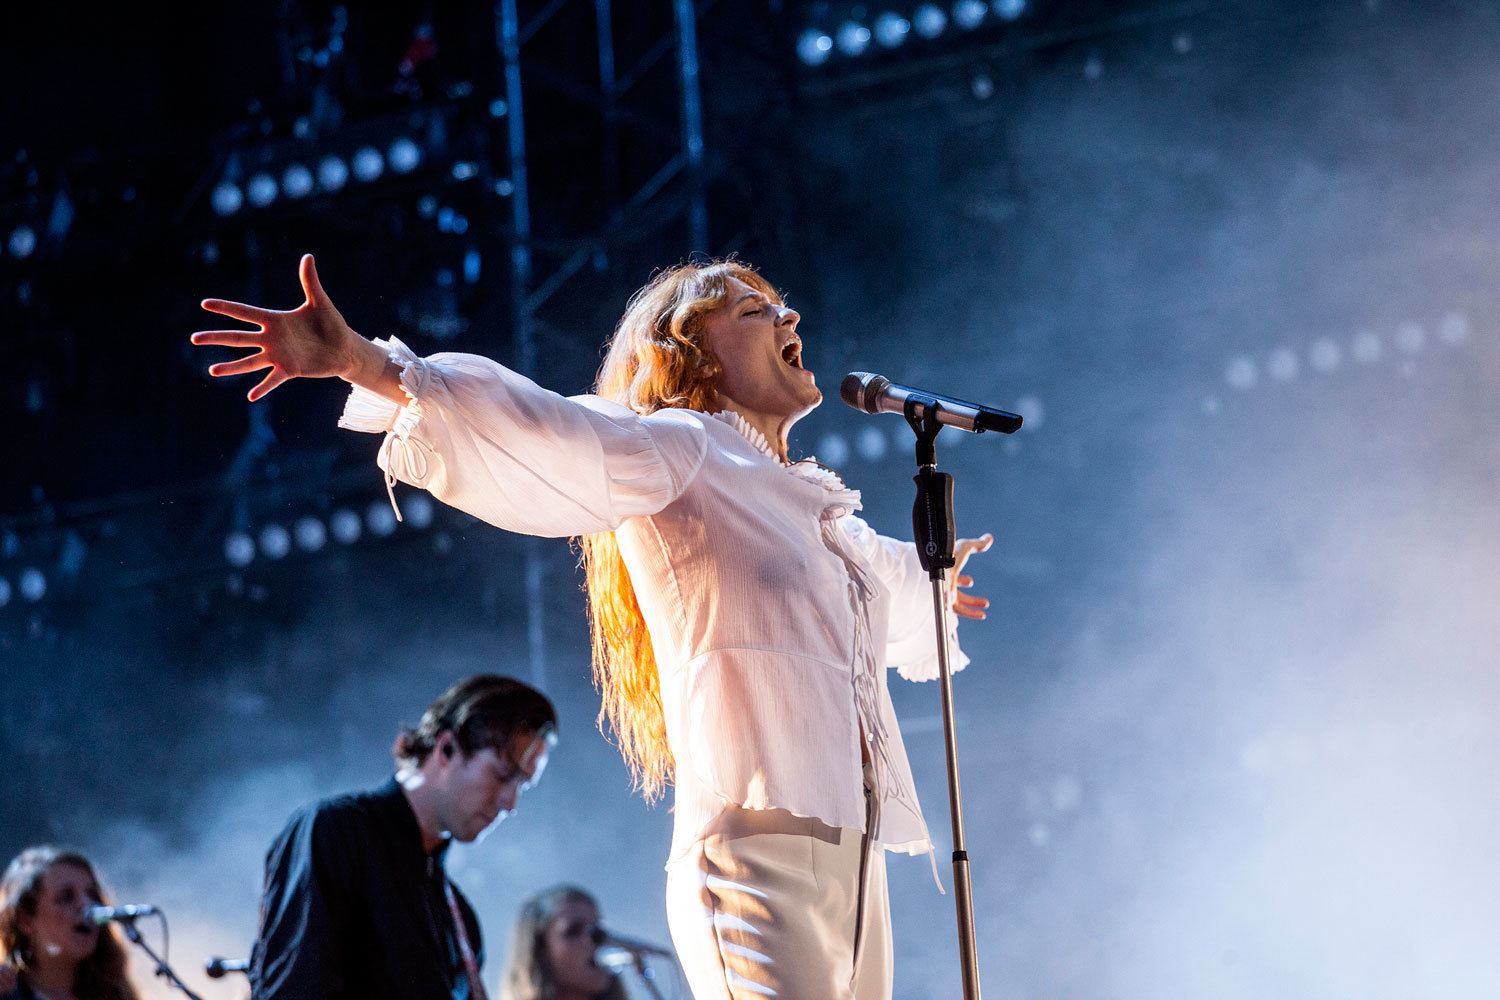 florence and the machine end summer tour on a high by headlining helsinki's flow  festival